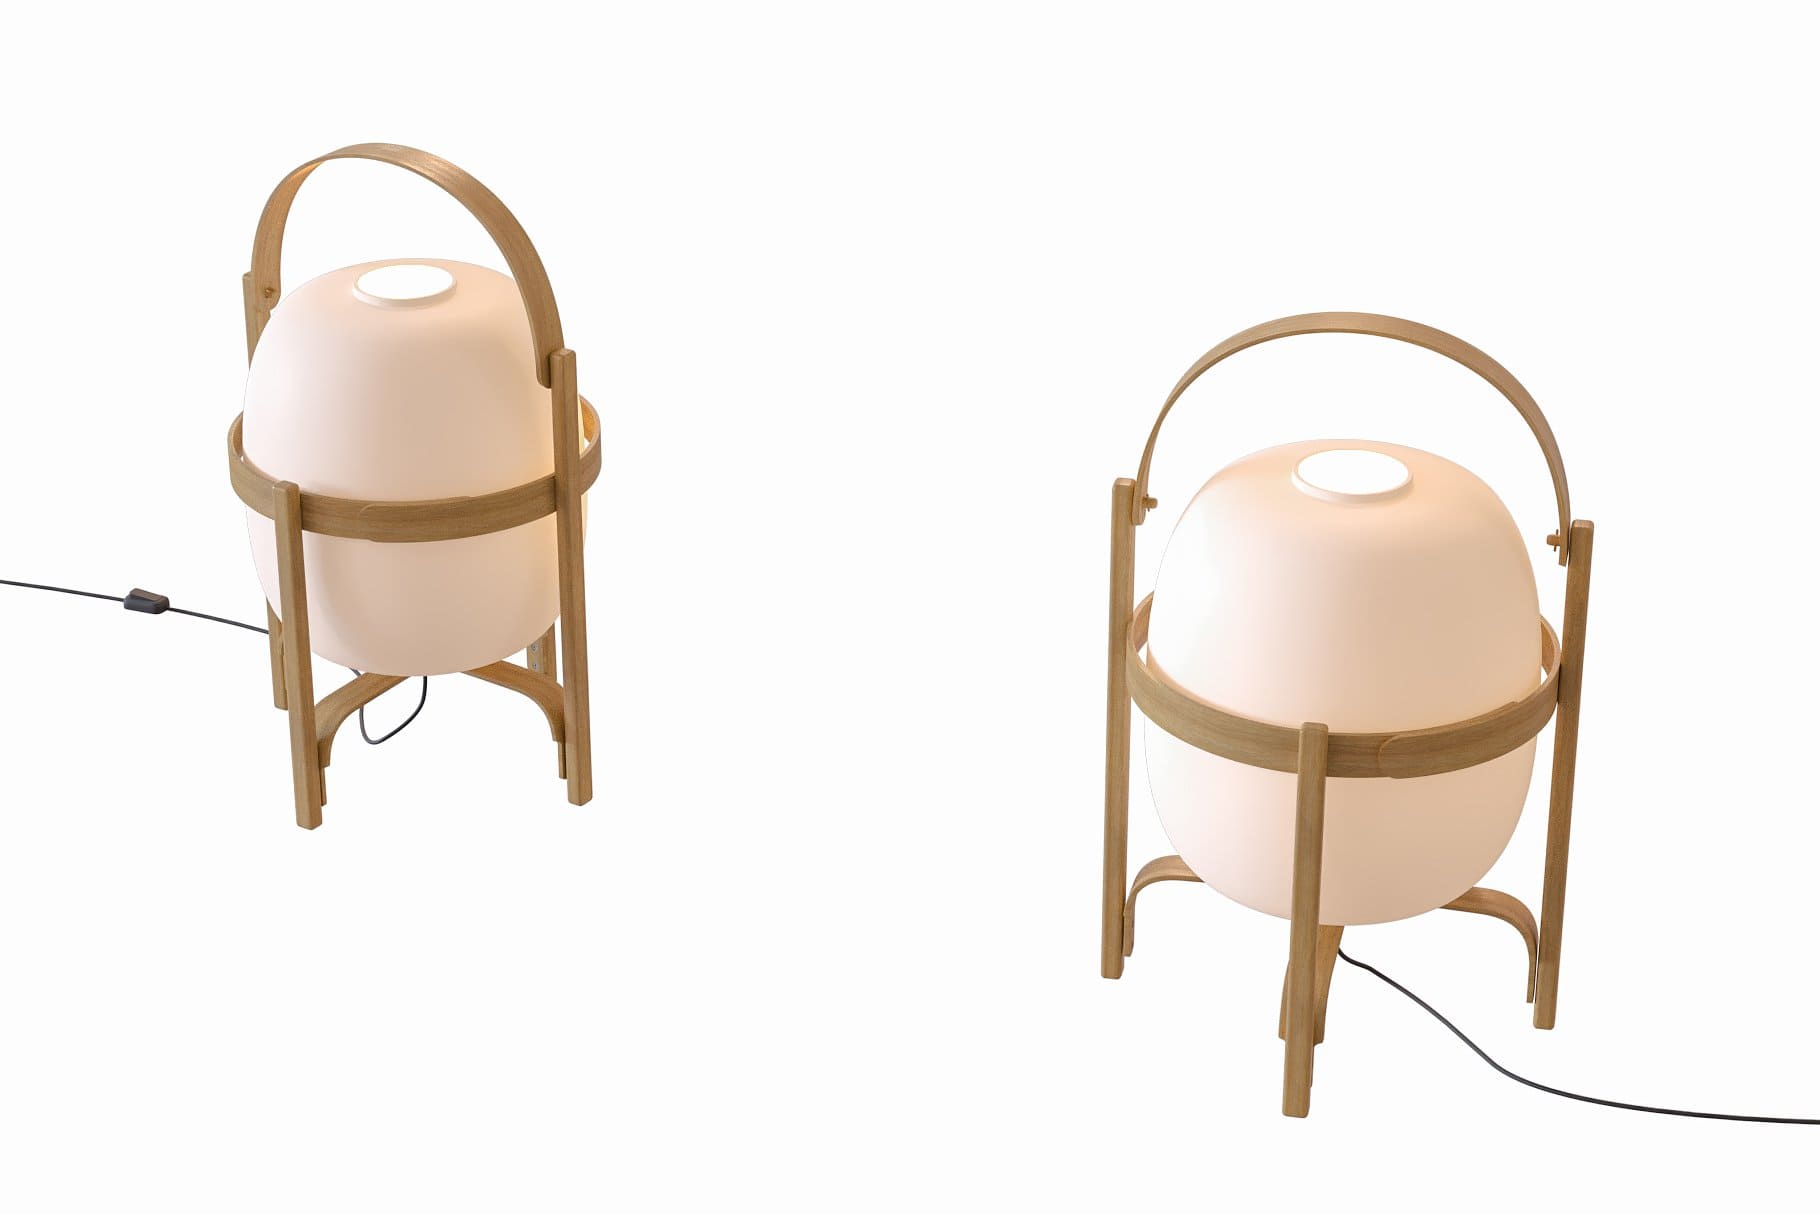 Two cesta table lamps stand on a white table.